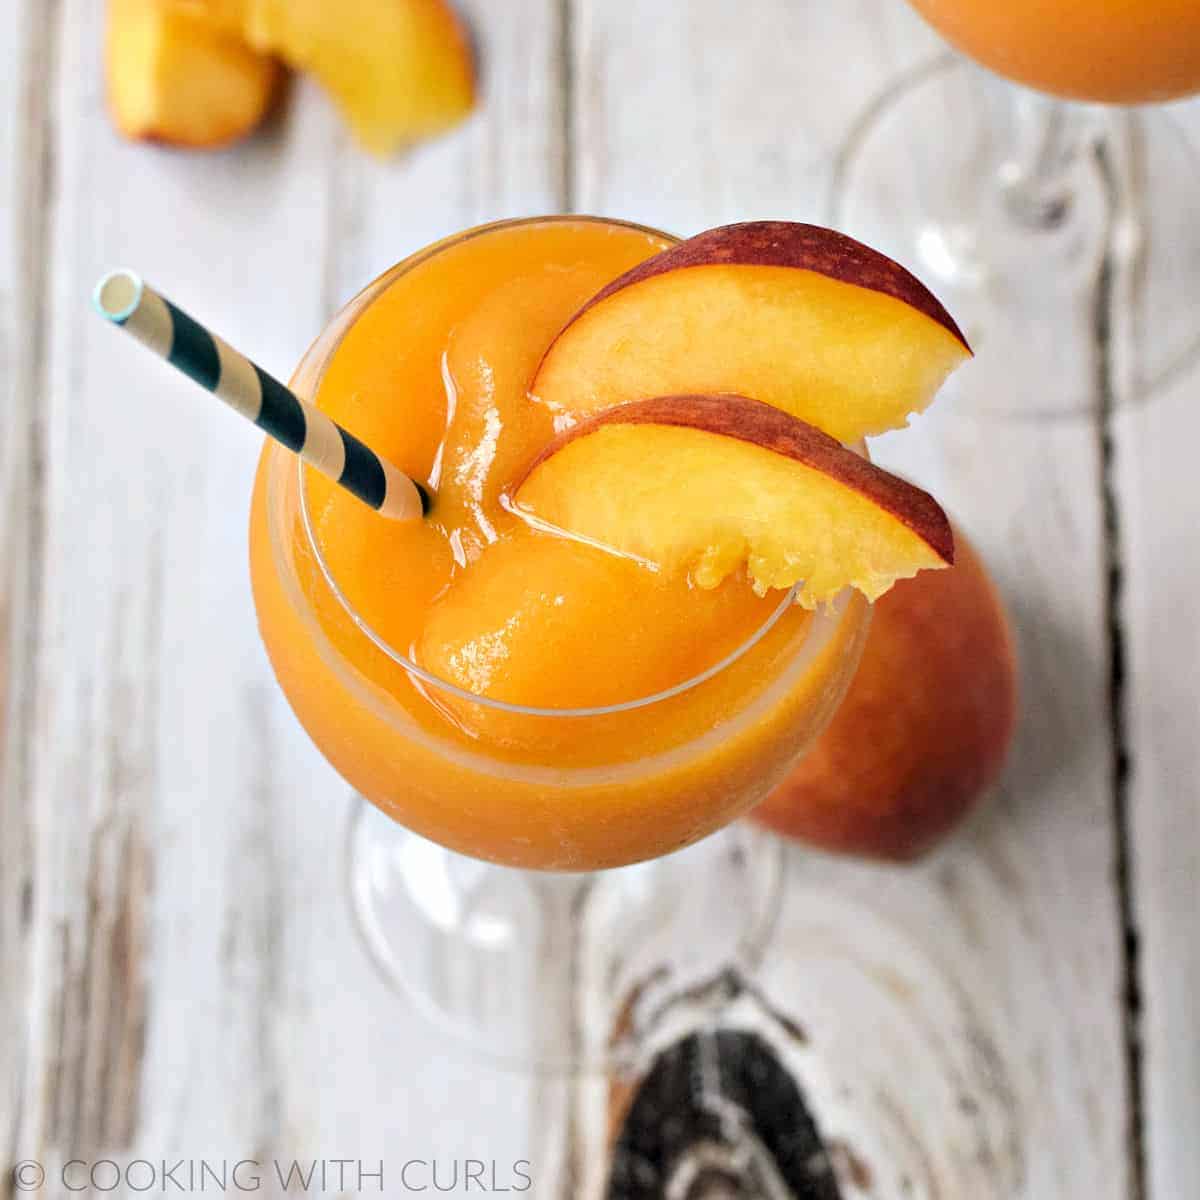 Looking down on two wine glasses filled with blended peaches and wine smoothie garnished with peach slices.